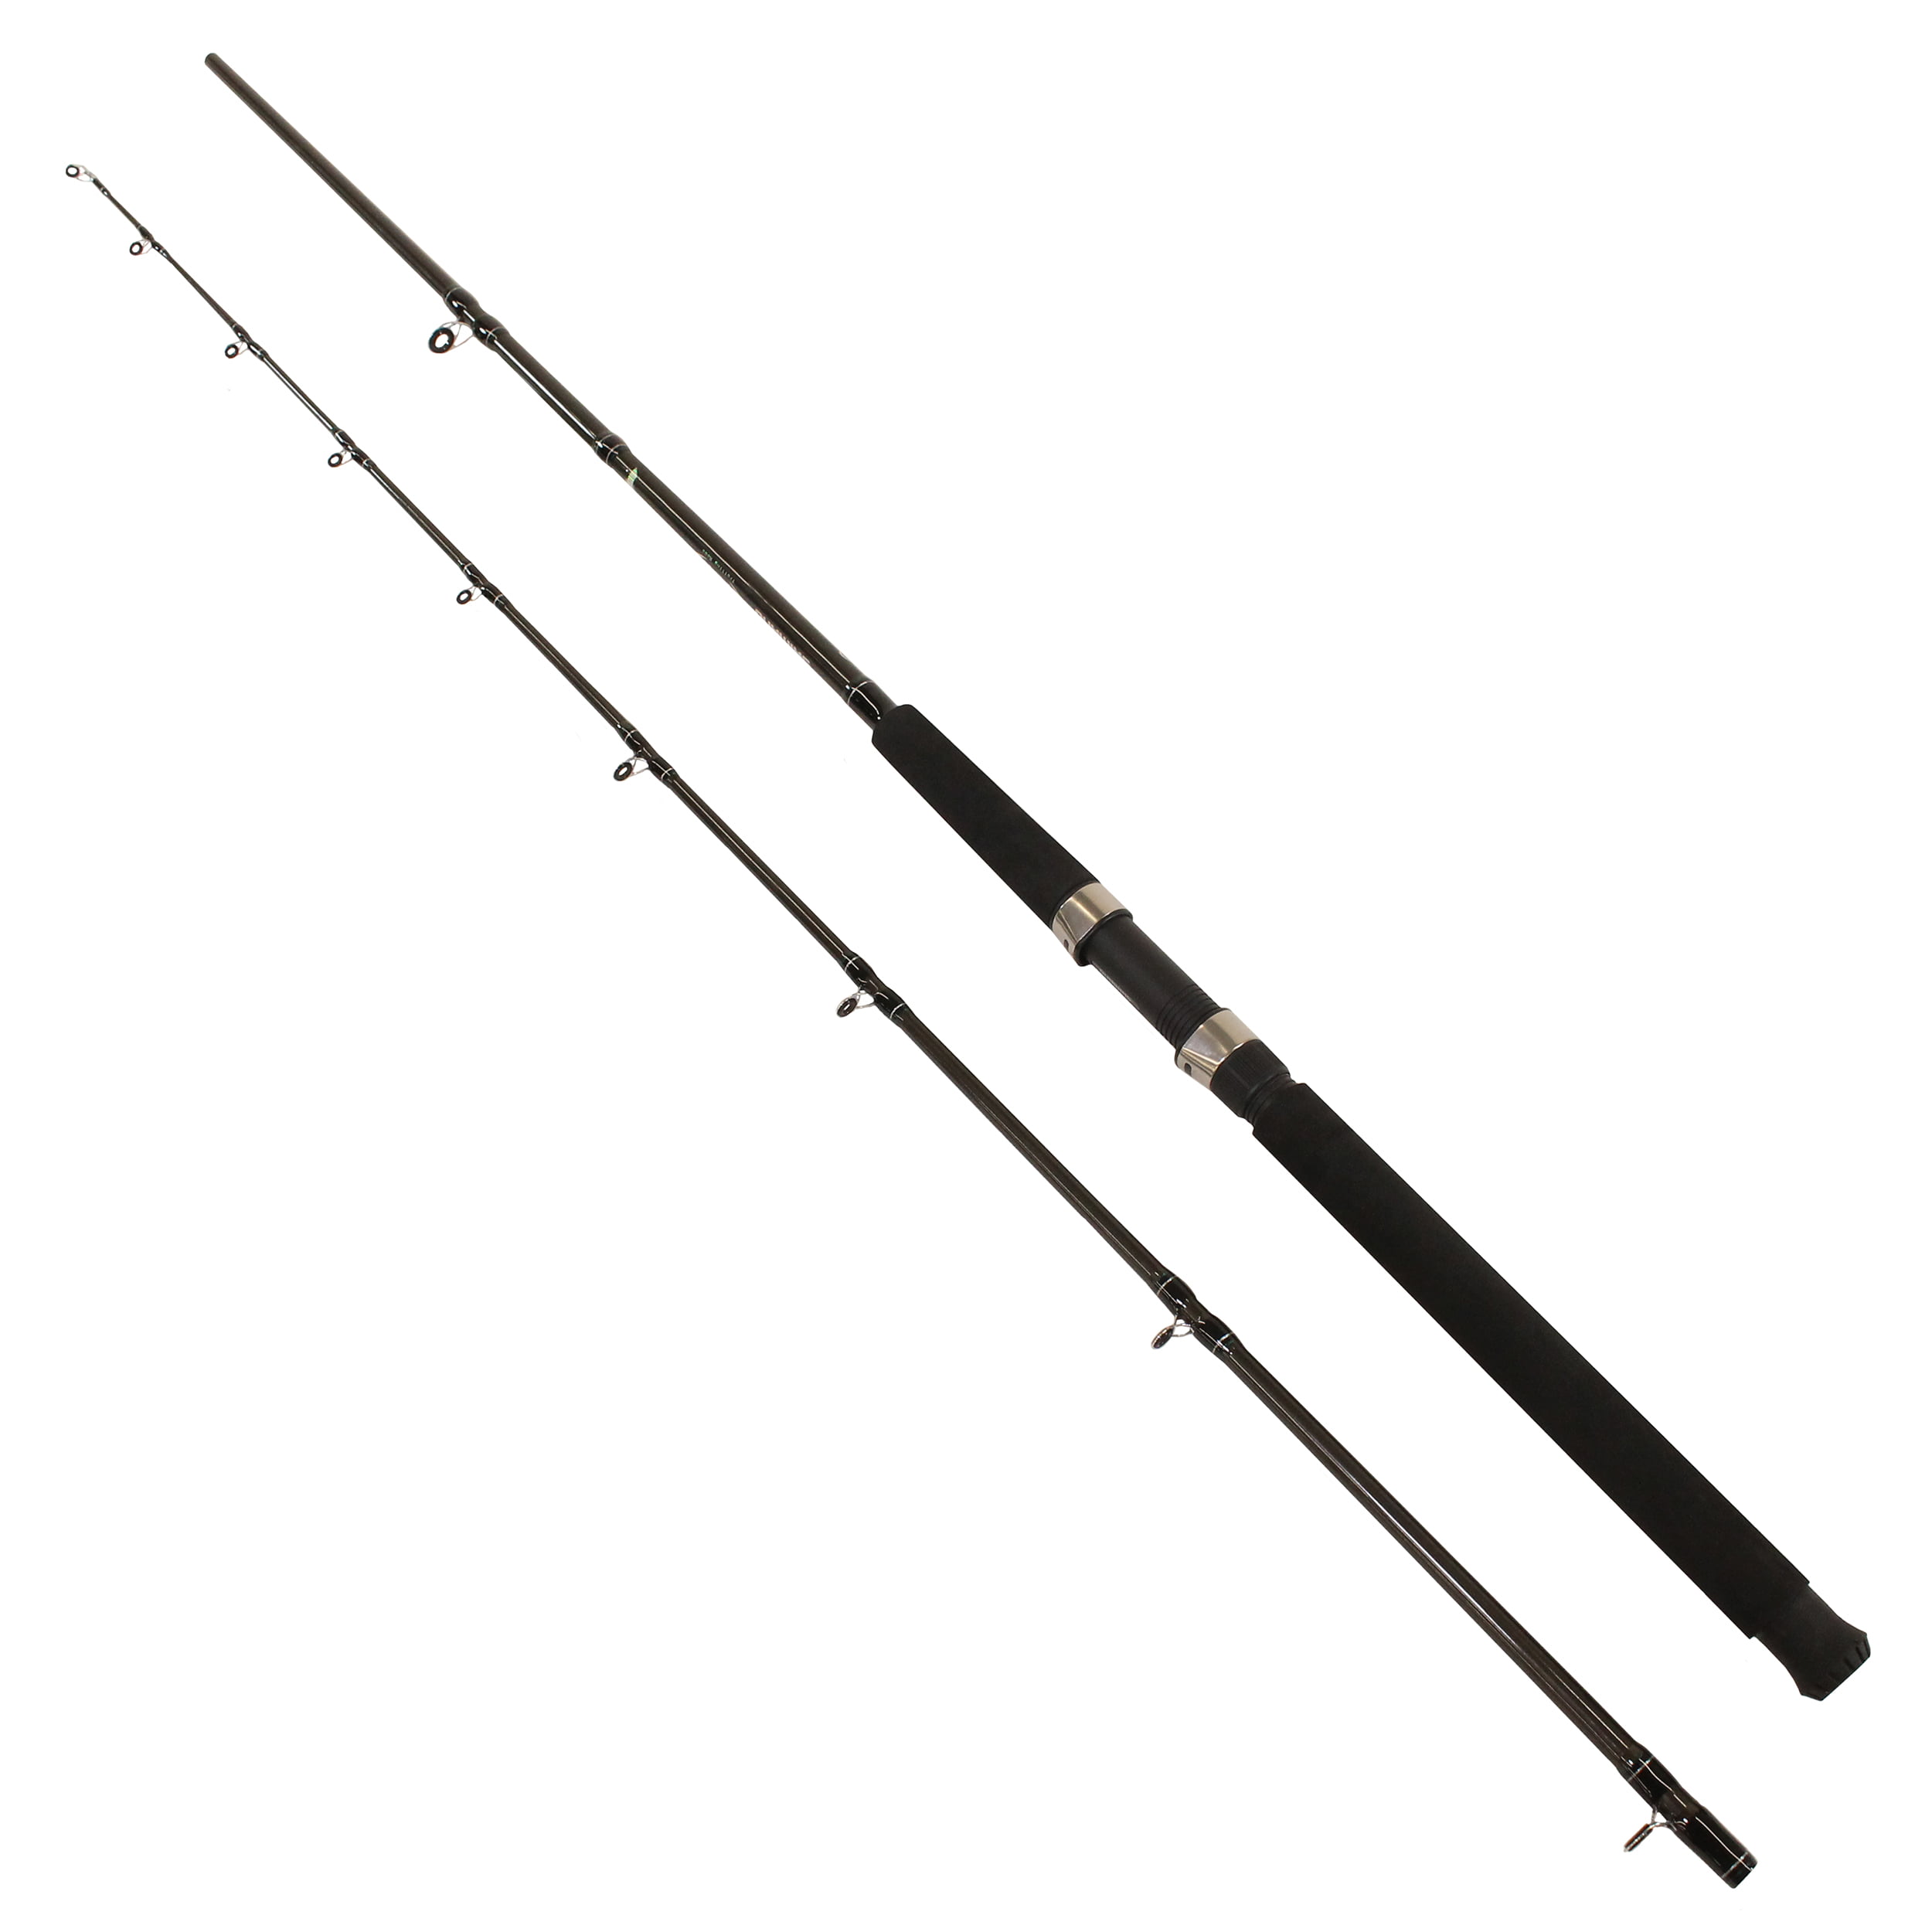 Shimano FX Spinning Rod 7' Length, 2pc Rod, 15-30 lb Line Rate, 1/2-3 oz  Lure Rate, Medium/Heavy Power 